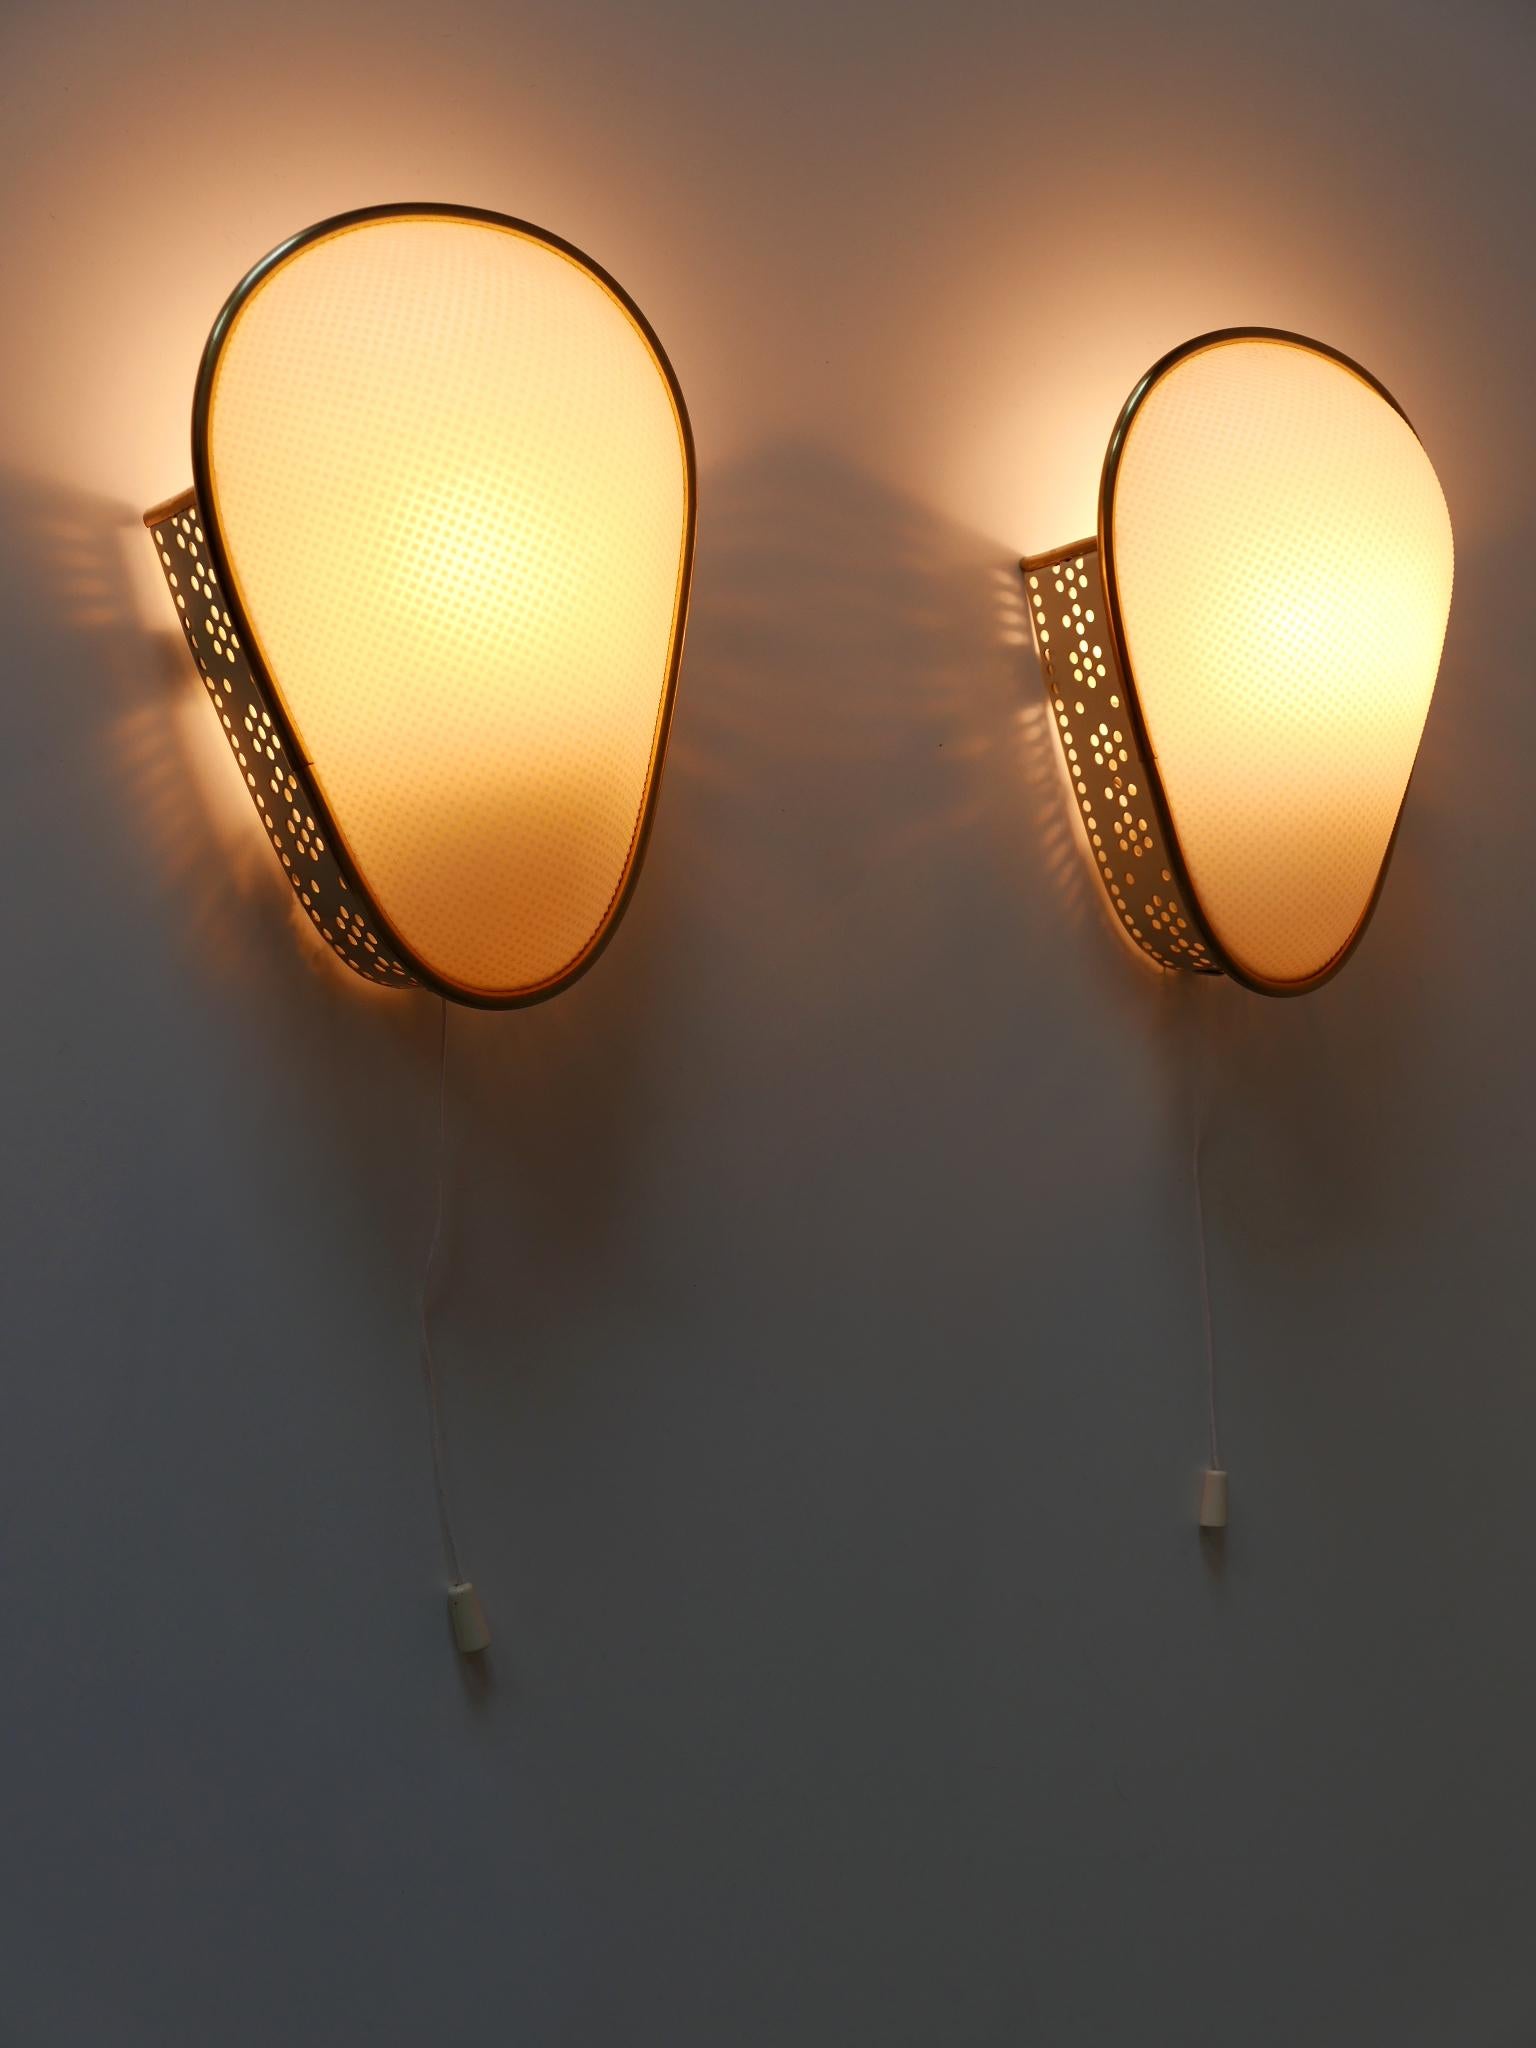 Set of Two Rare & Elegant Mid-Century Modern Sconces or Wall Lamps Germany 1950s For Sale 3